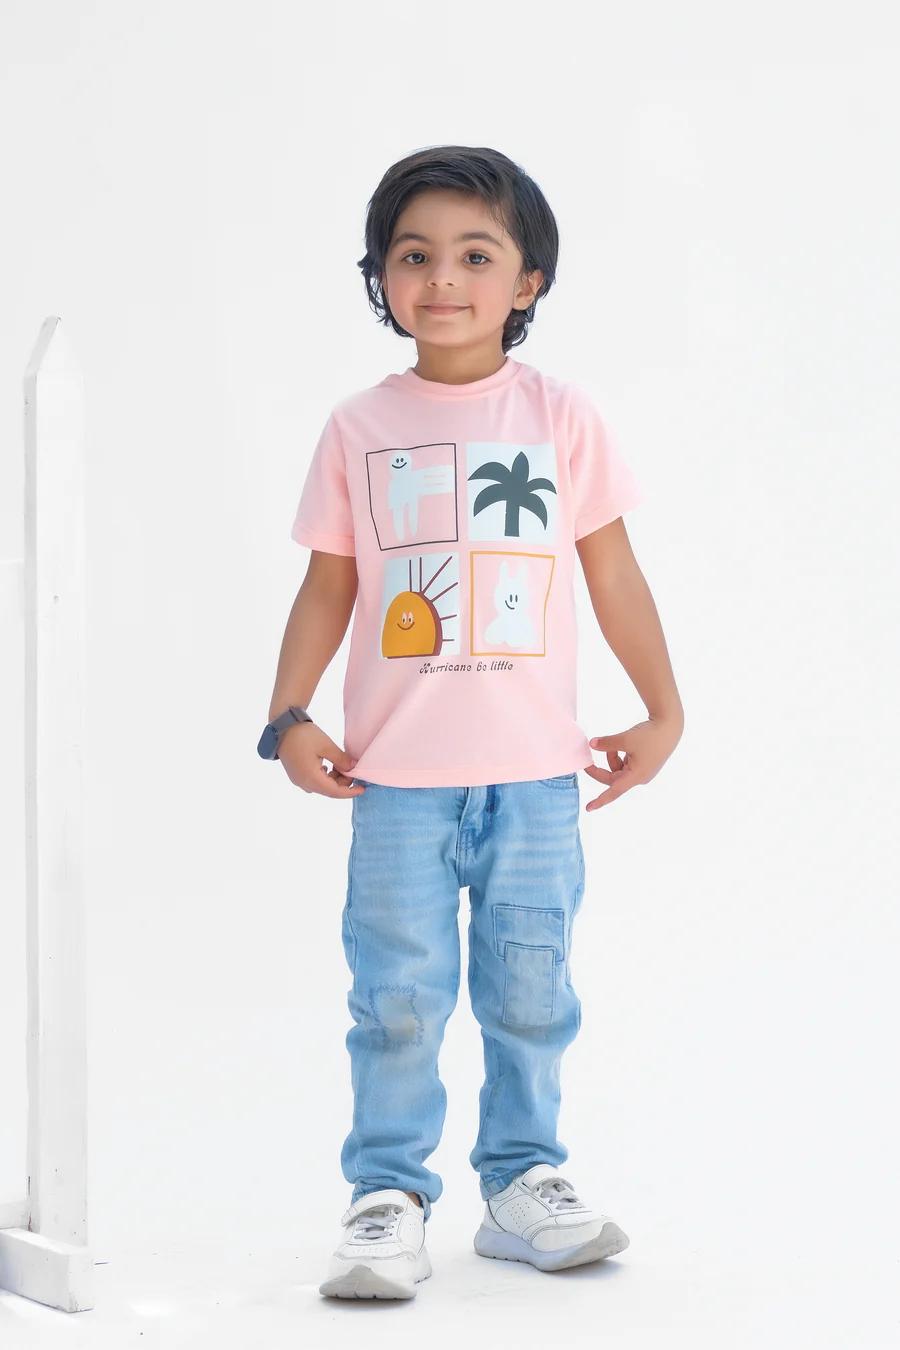 Hurricane Be Little - Half Sleeves T-Shirts For Kids - Pink - SBT-356